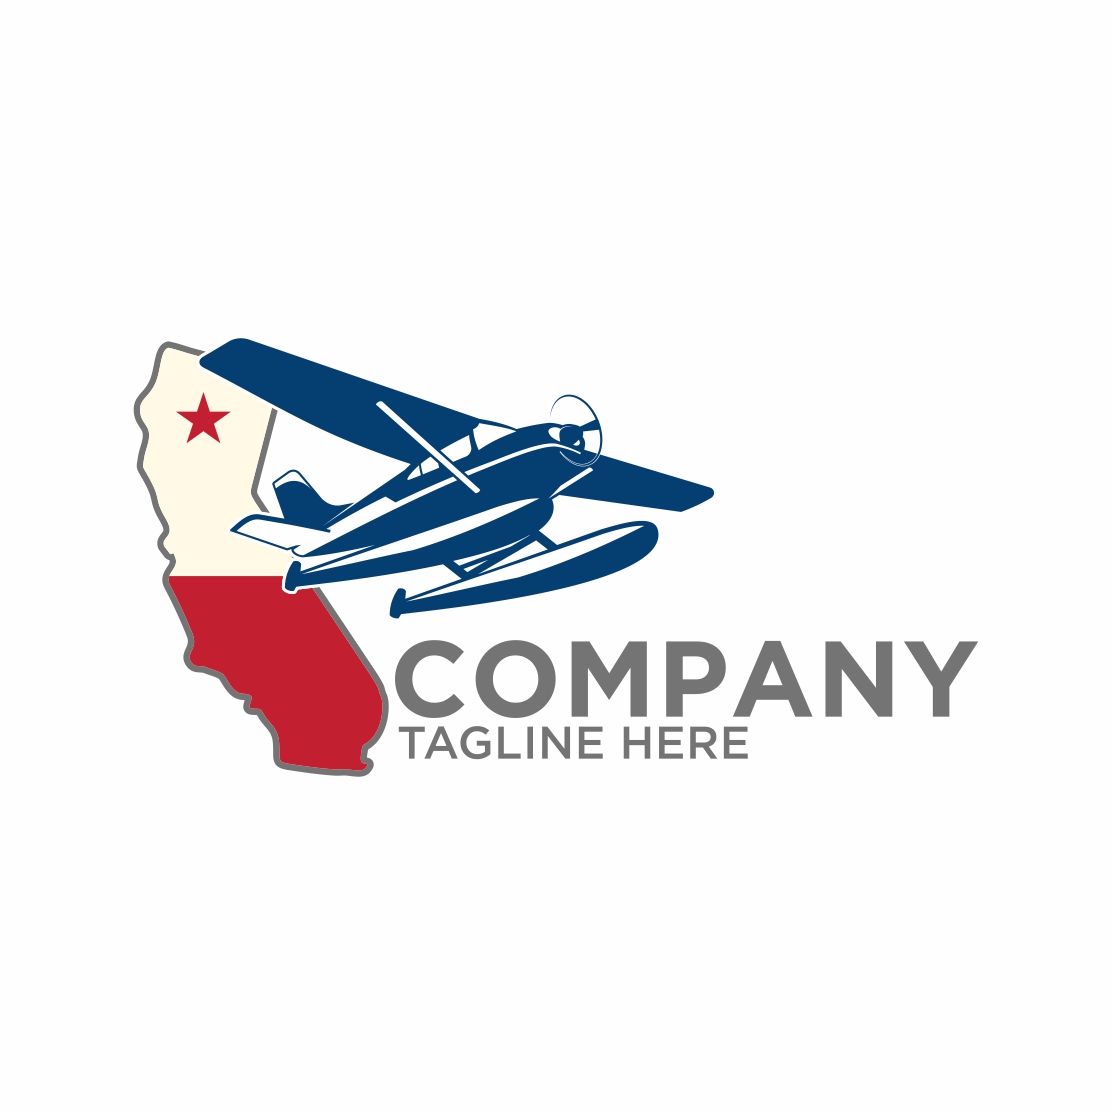 Plane logo design with flights in california - only 5$ preview image.